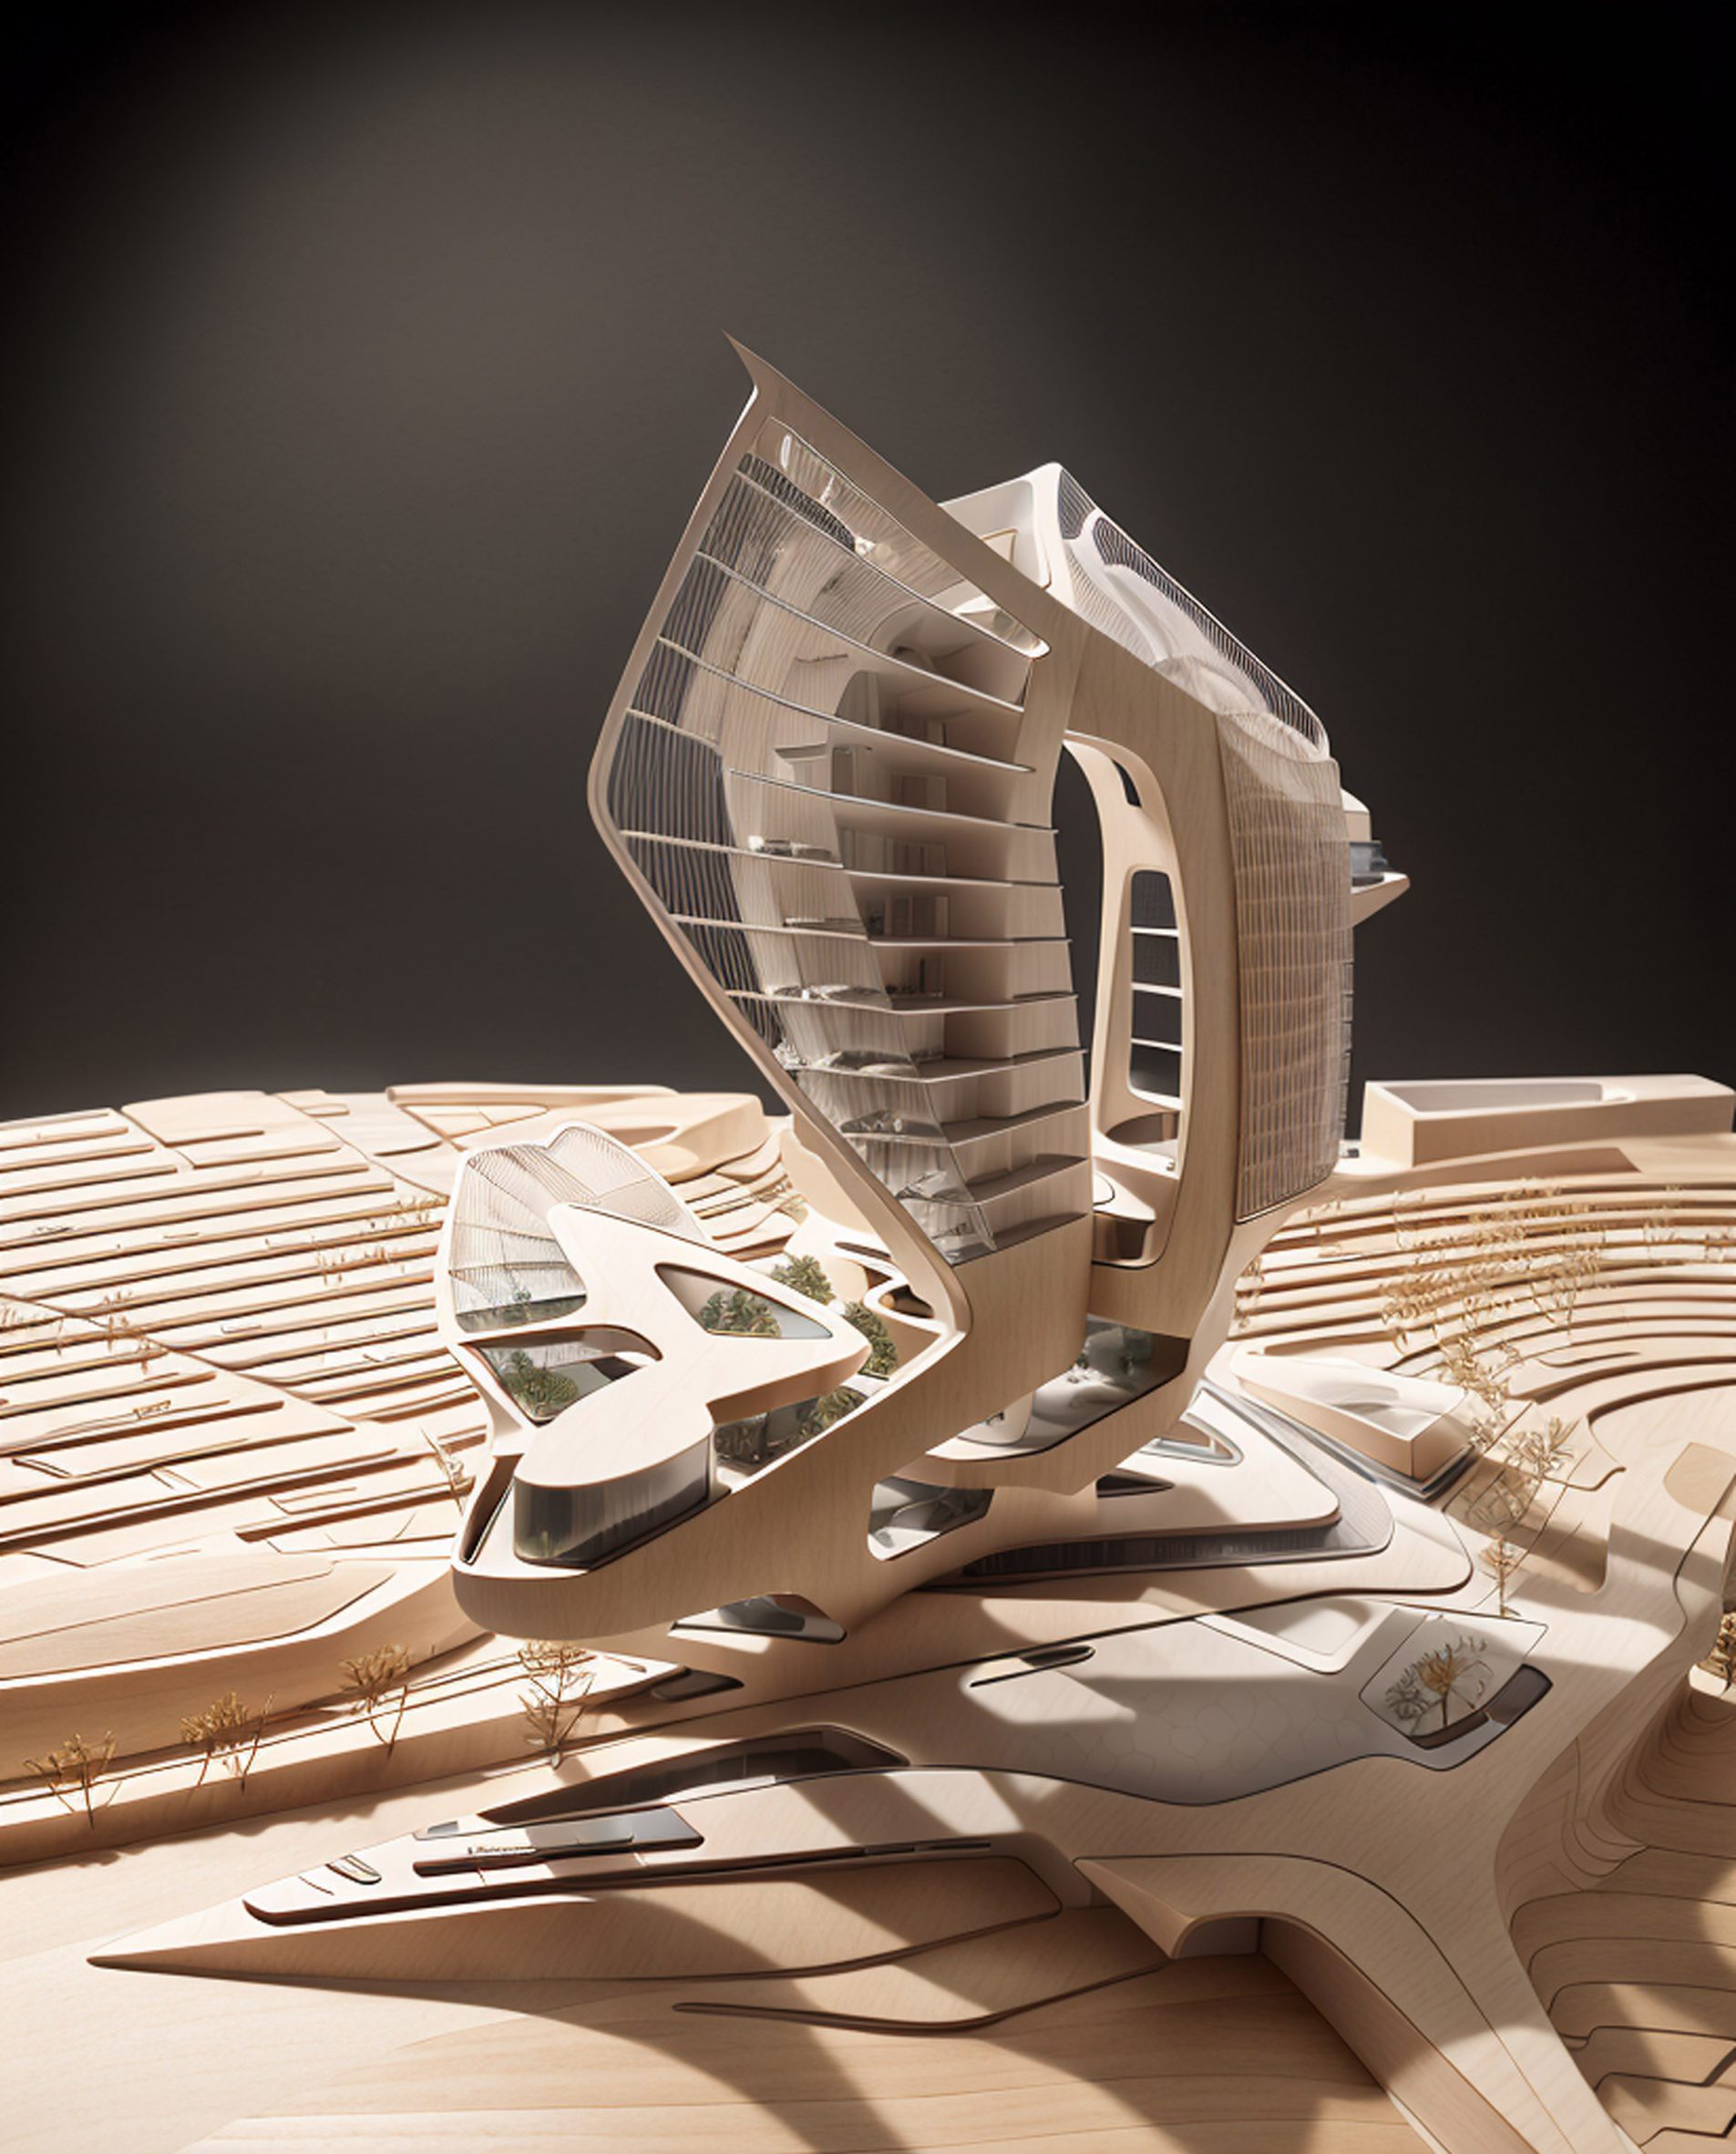 Zaha Hadid building made from crumpled paper